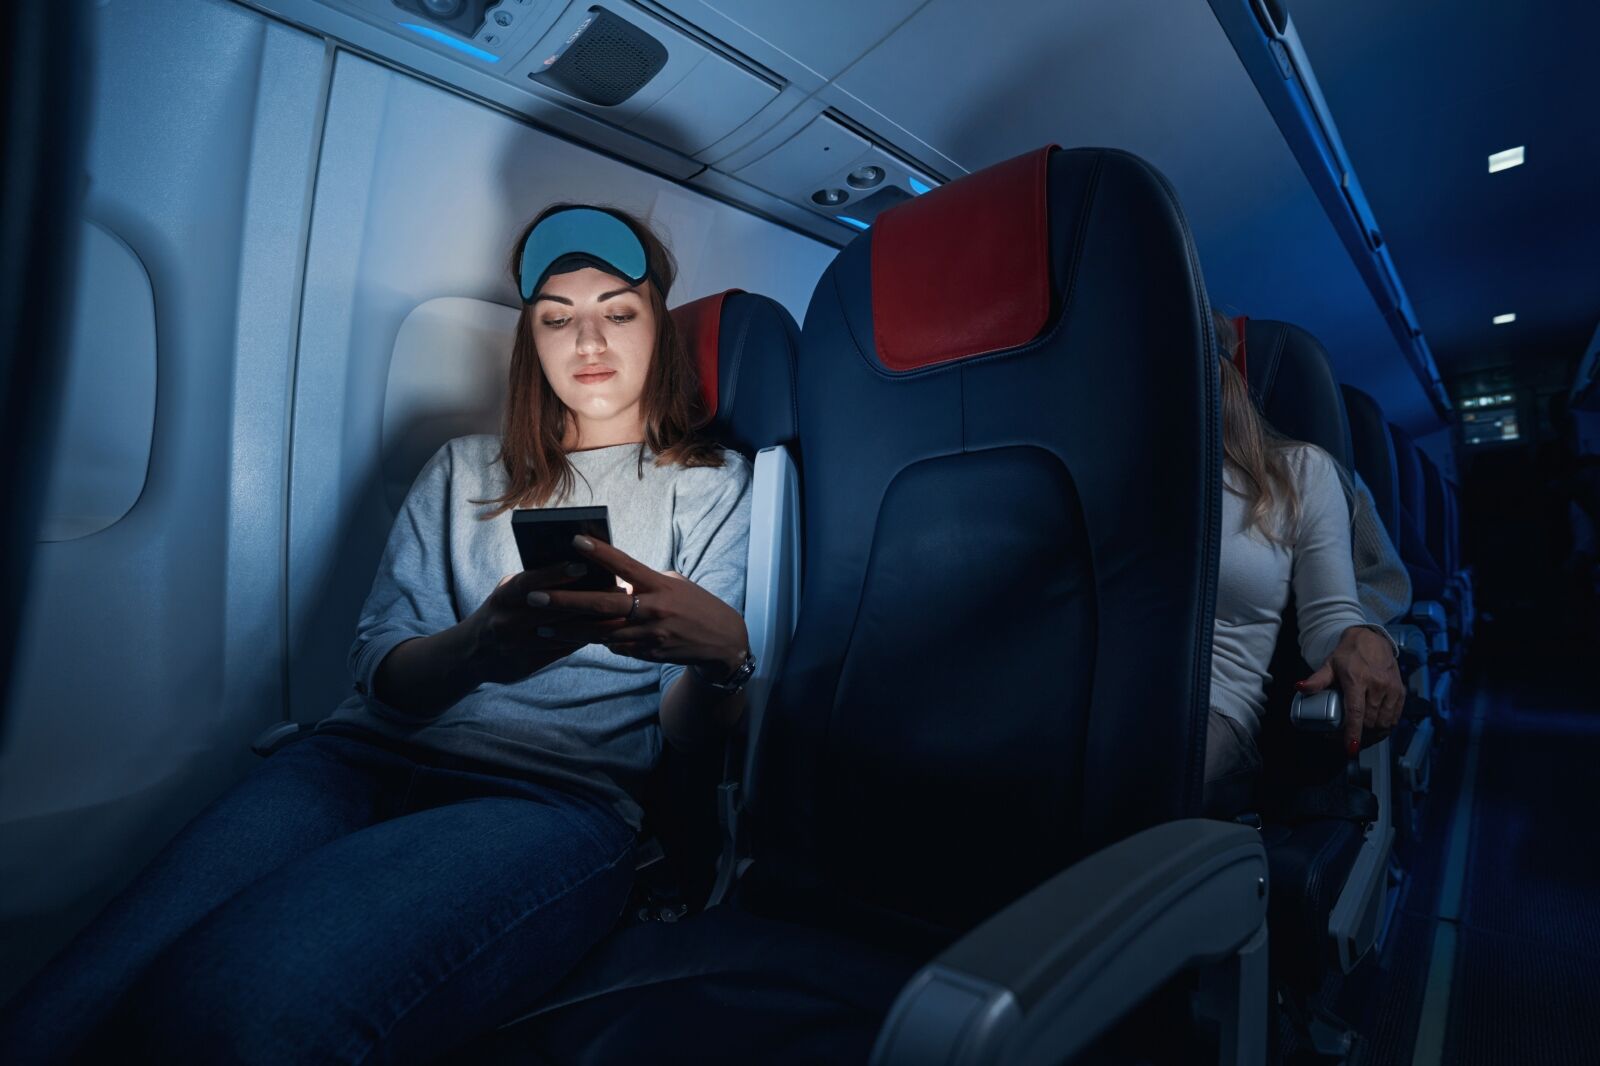 Female clicking her smartphone during night flight 